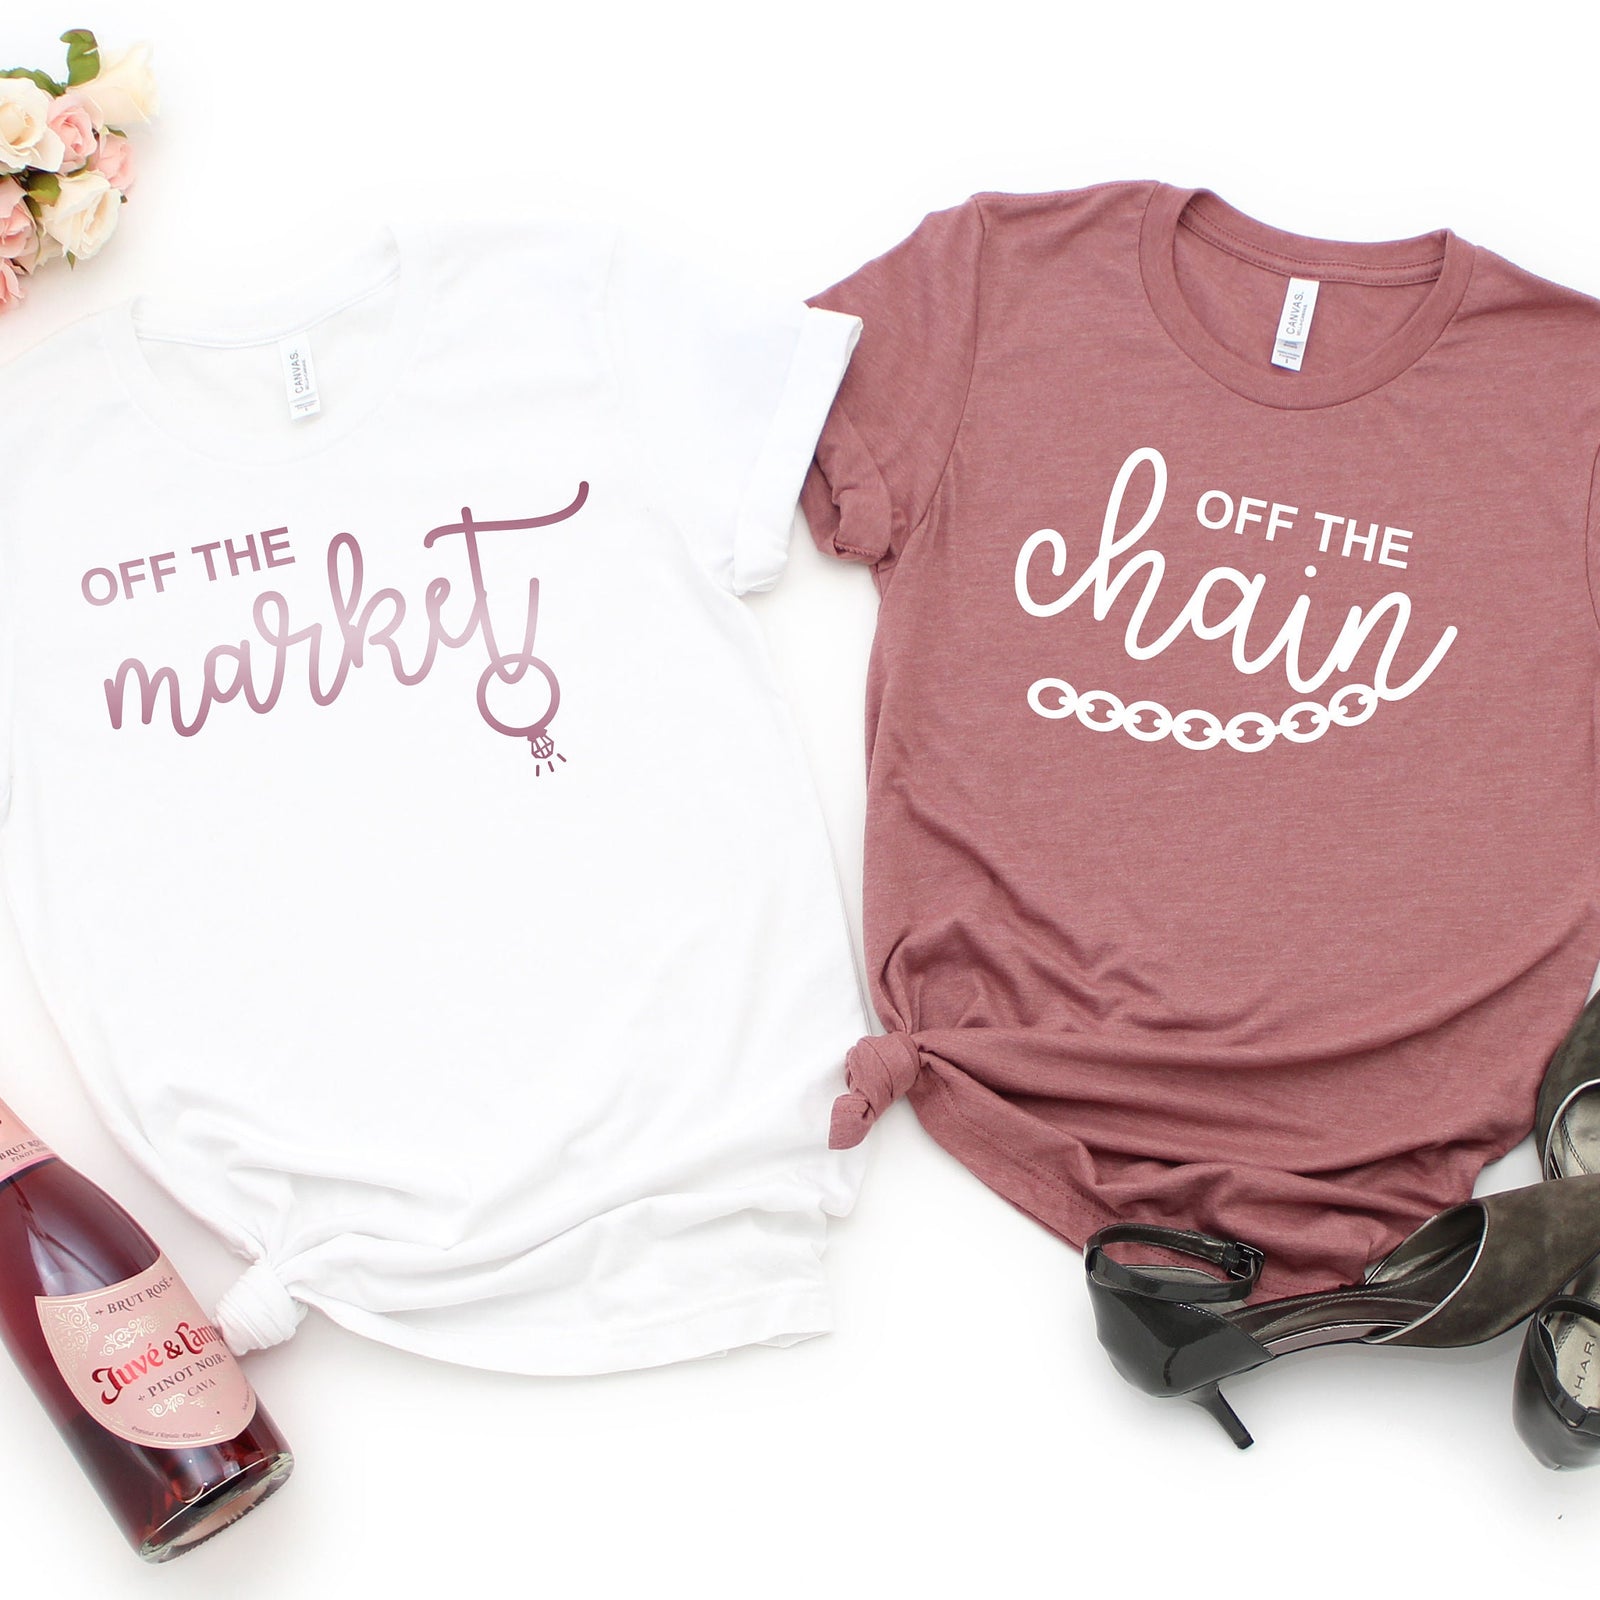 Off the Market Bride T Shirt - Off the Chain T Shirt- Funny Bachelorette Party T Shirts - Bridal Party T Shirts